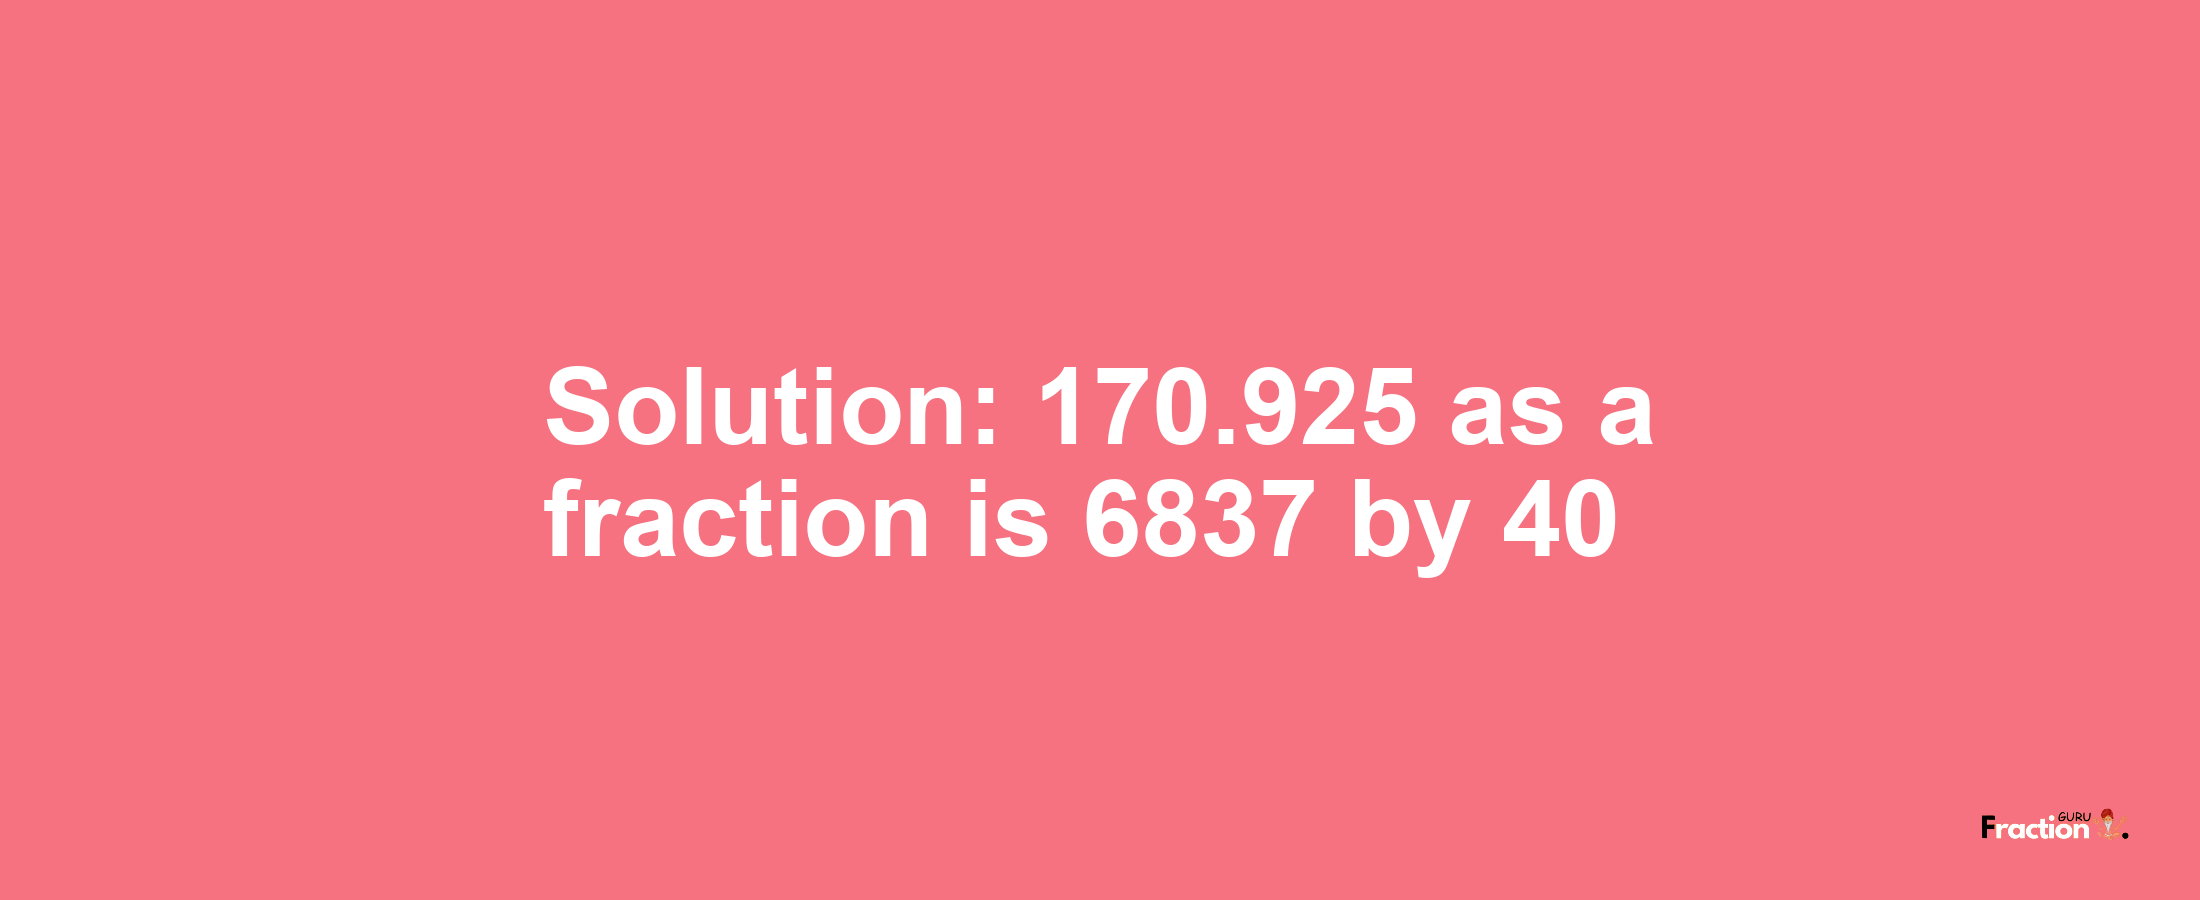 Solution:170.925 as a fraction is 6837/40